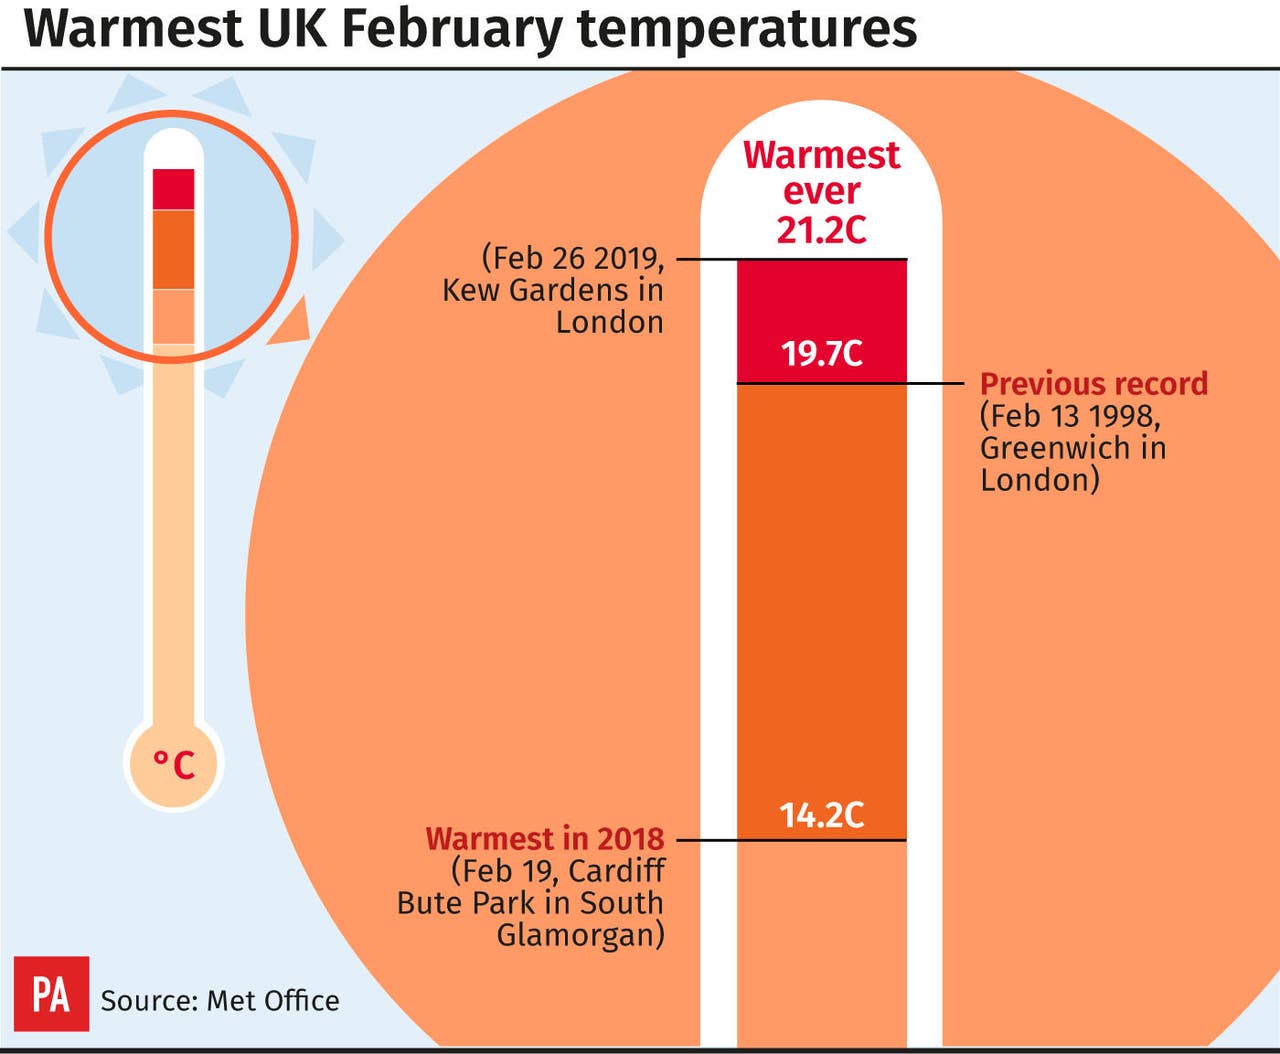 Climate change played role in record winter heat, experts suggest The